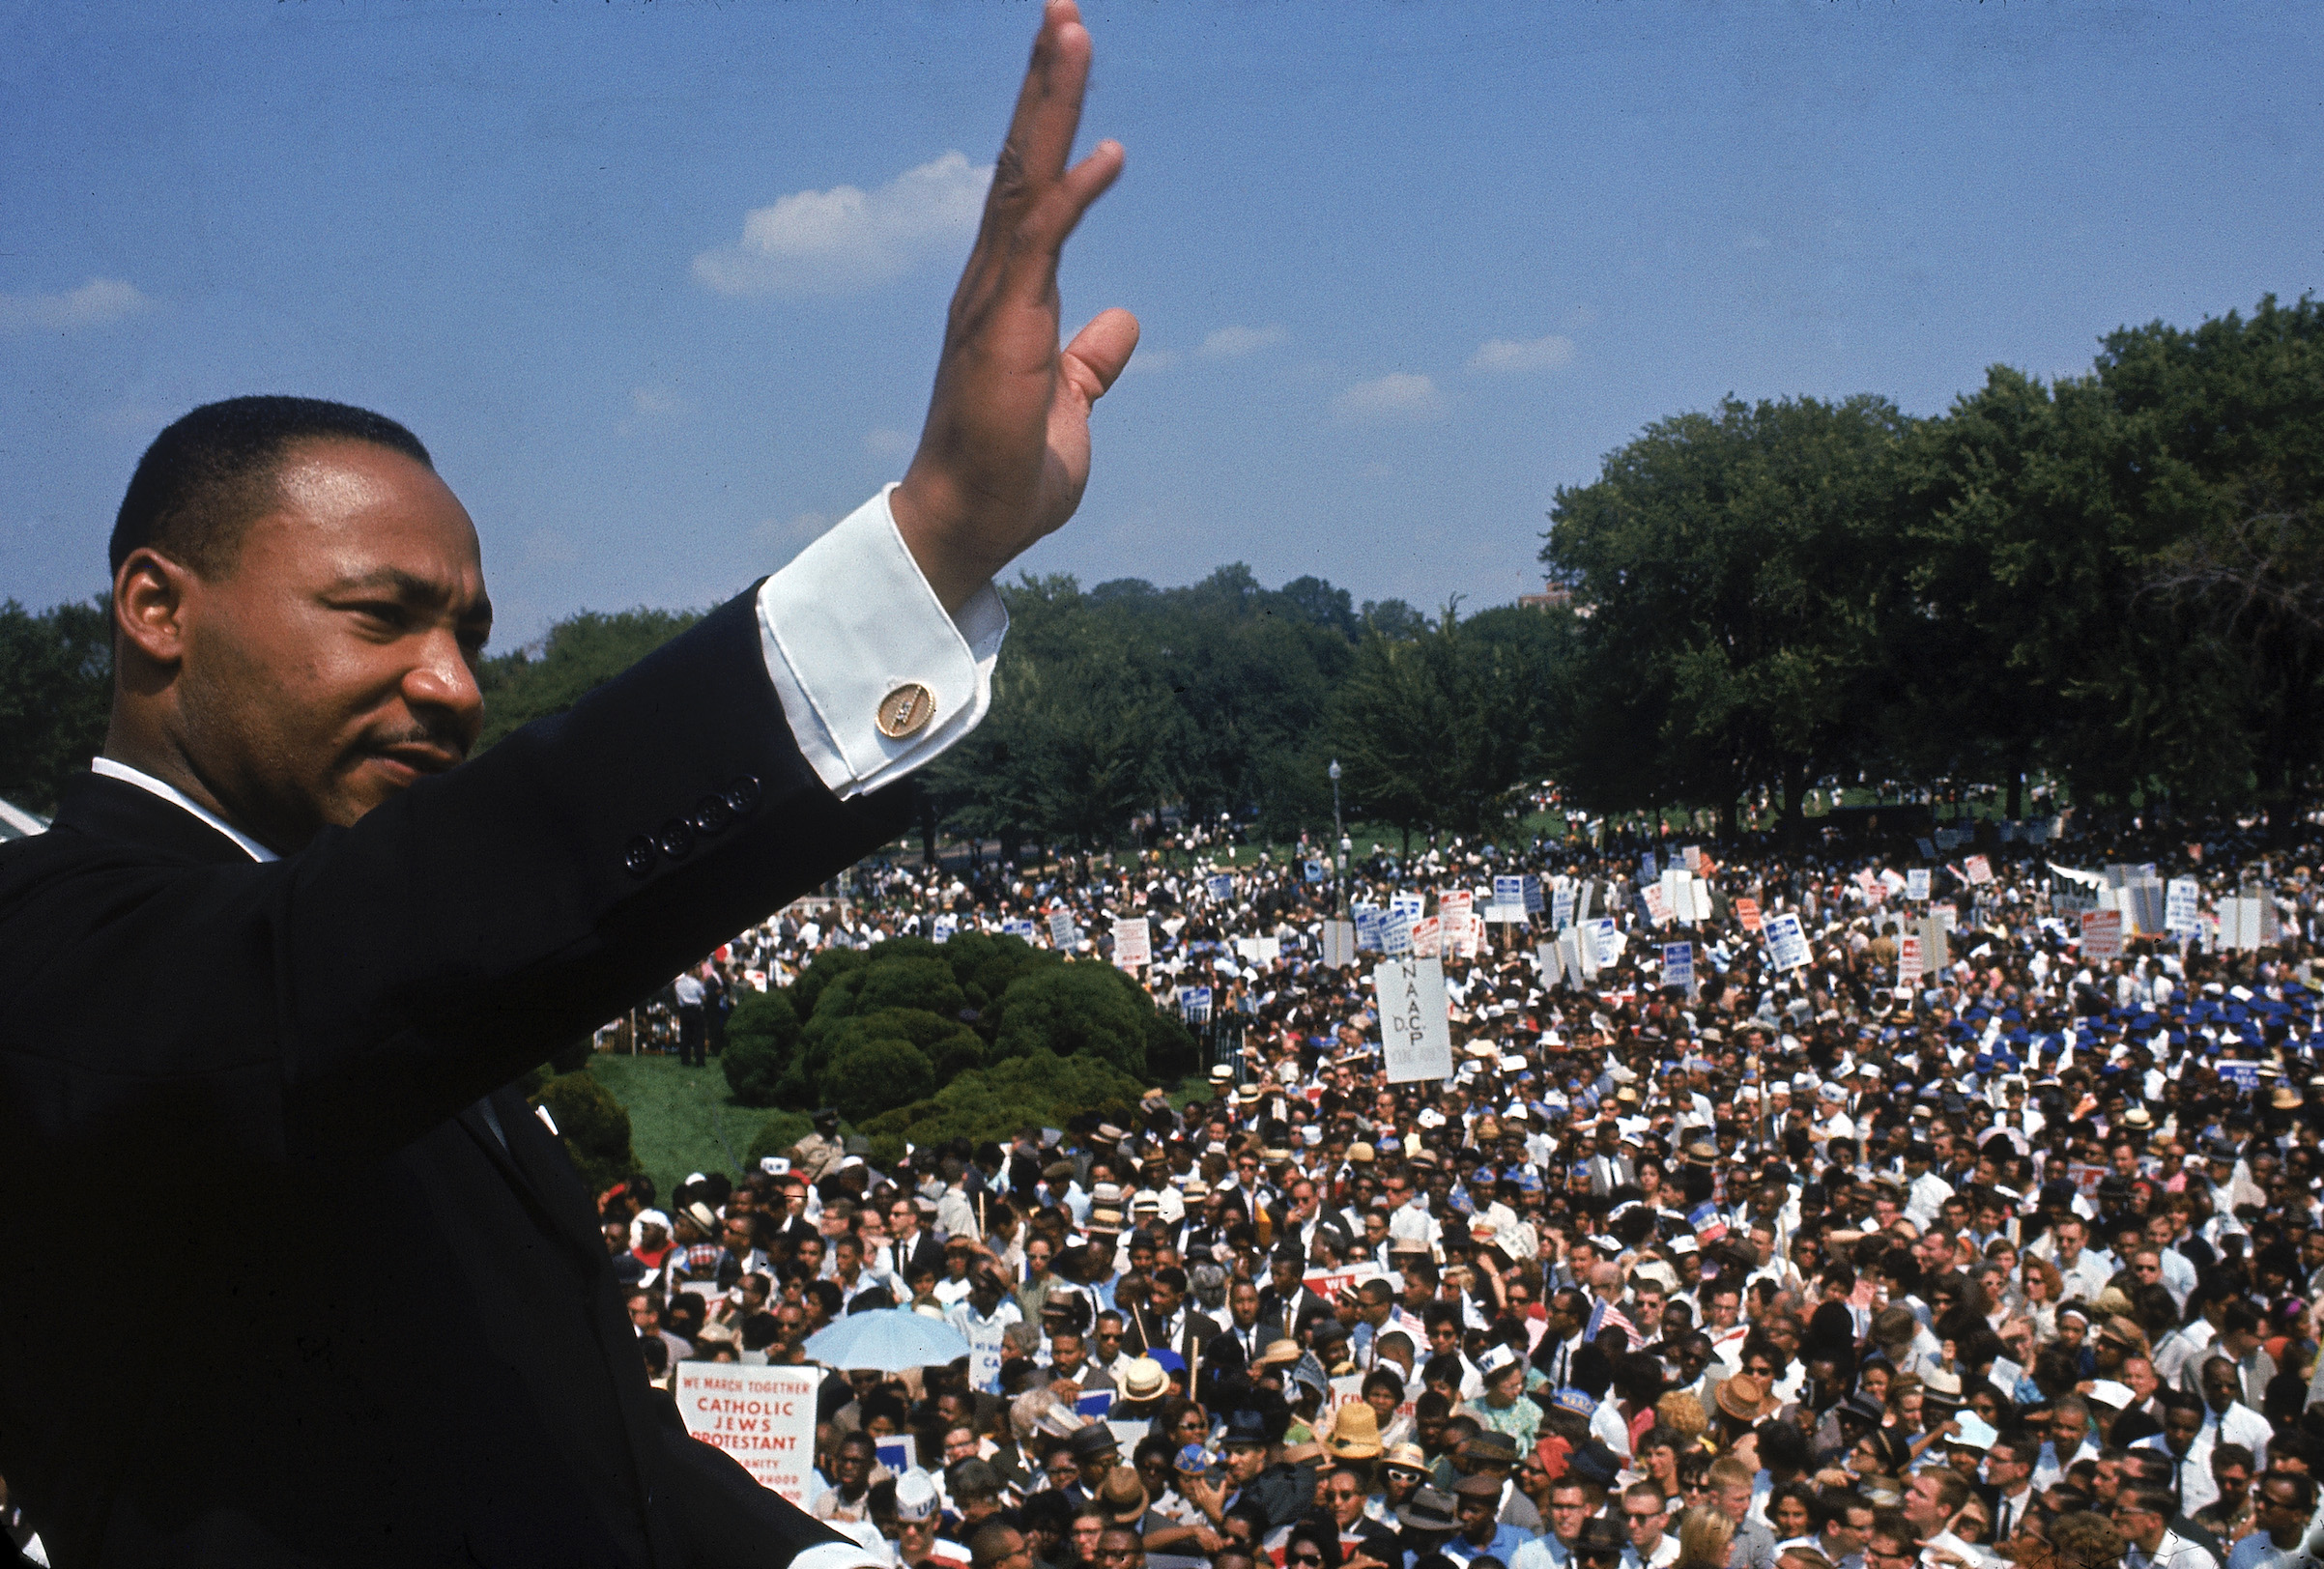 Martin Luther King Jr. addressing crowd of demonstrators outside the Lincoln Memorial during the March on Washington for Jobs and Freedom (Francis Miller—The LIFE Picture Collection / Getty Images)